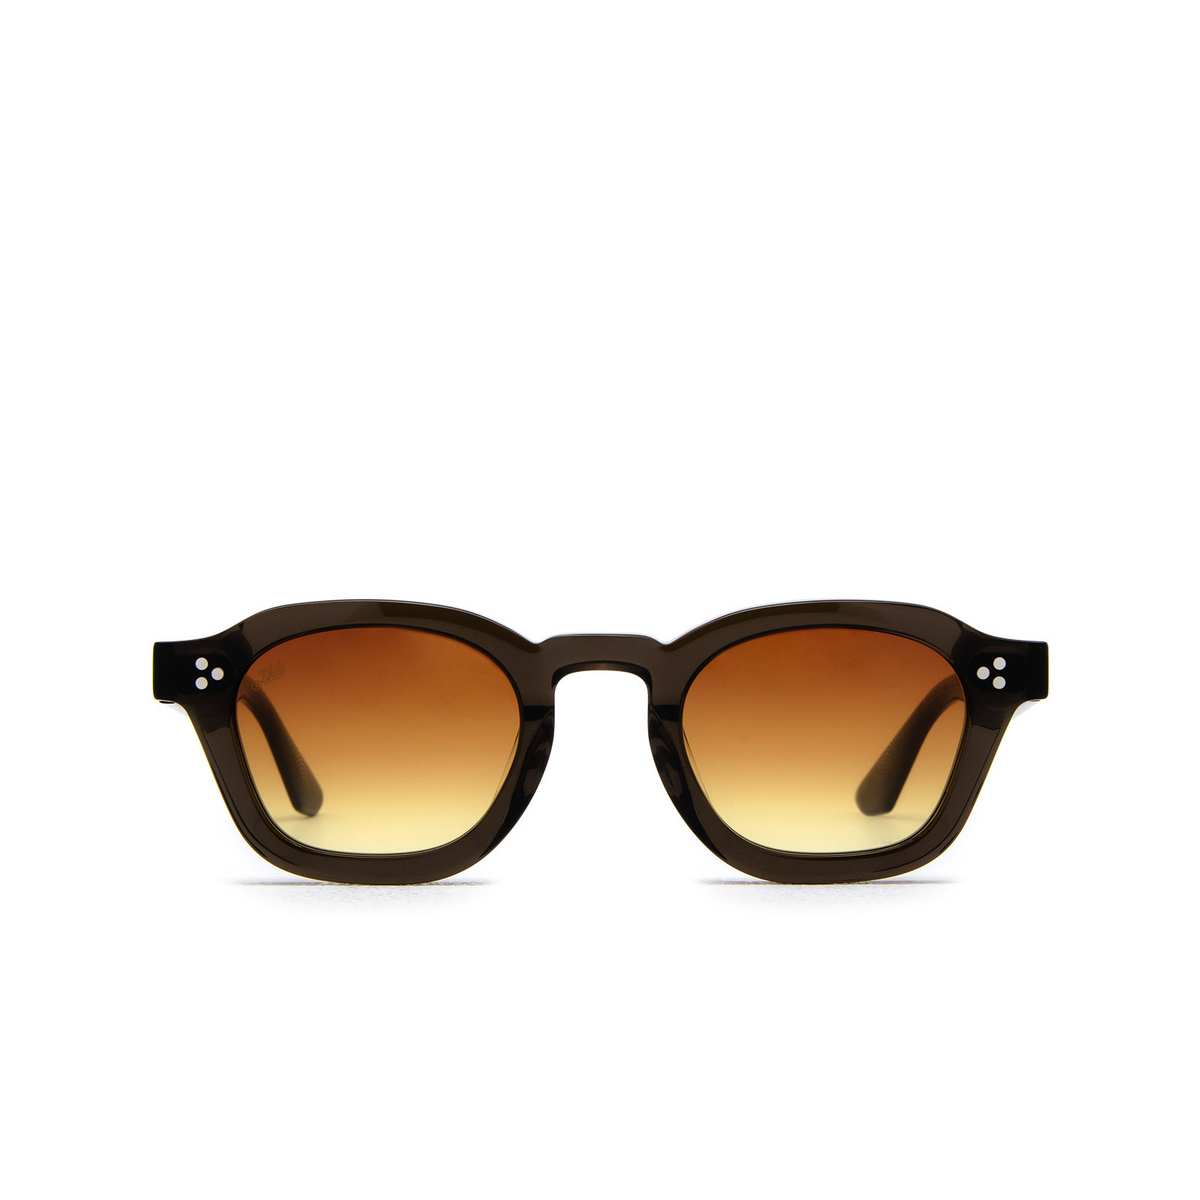 Akila LOGOS Sunglasses 07/86 Umber - front view